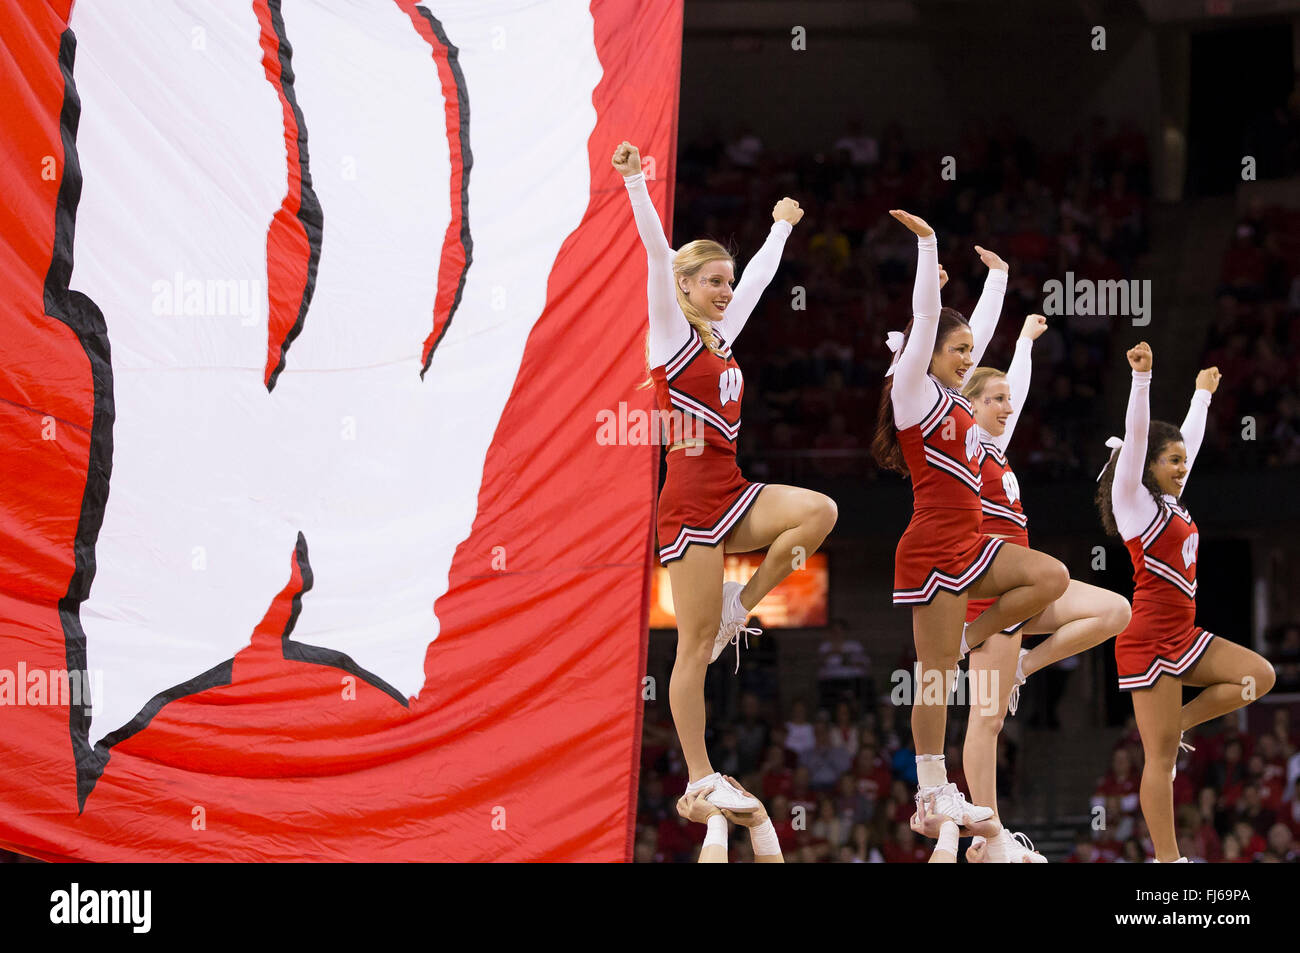 Madison, WI, USA. 28th Feb, 2016. Wisconsin cheerleaders during the NCAA Basketball game between the Michigan Wolverines and the Wisconsin Badgers at the Kohl Center in Madison, WI. Wisconsin defeated Michigan 68-57. John Fisher/CSM/Alamy Live News Stock Photo